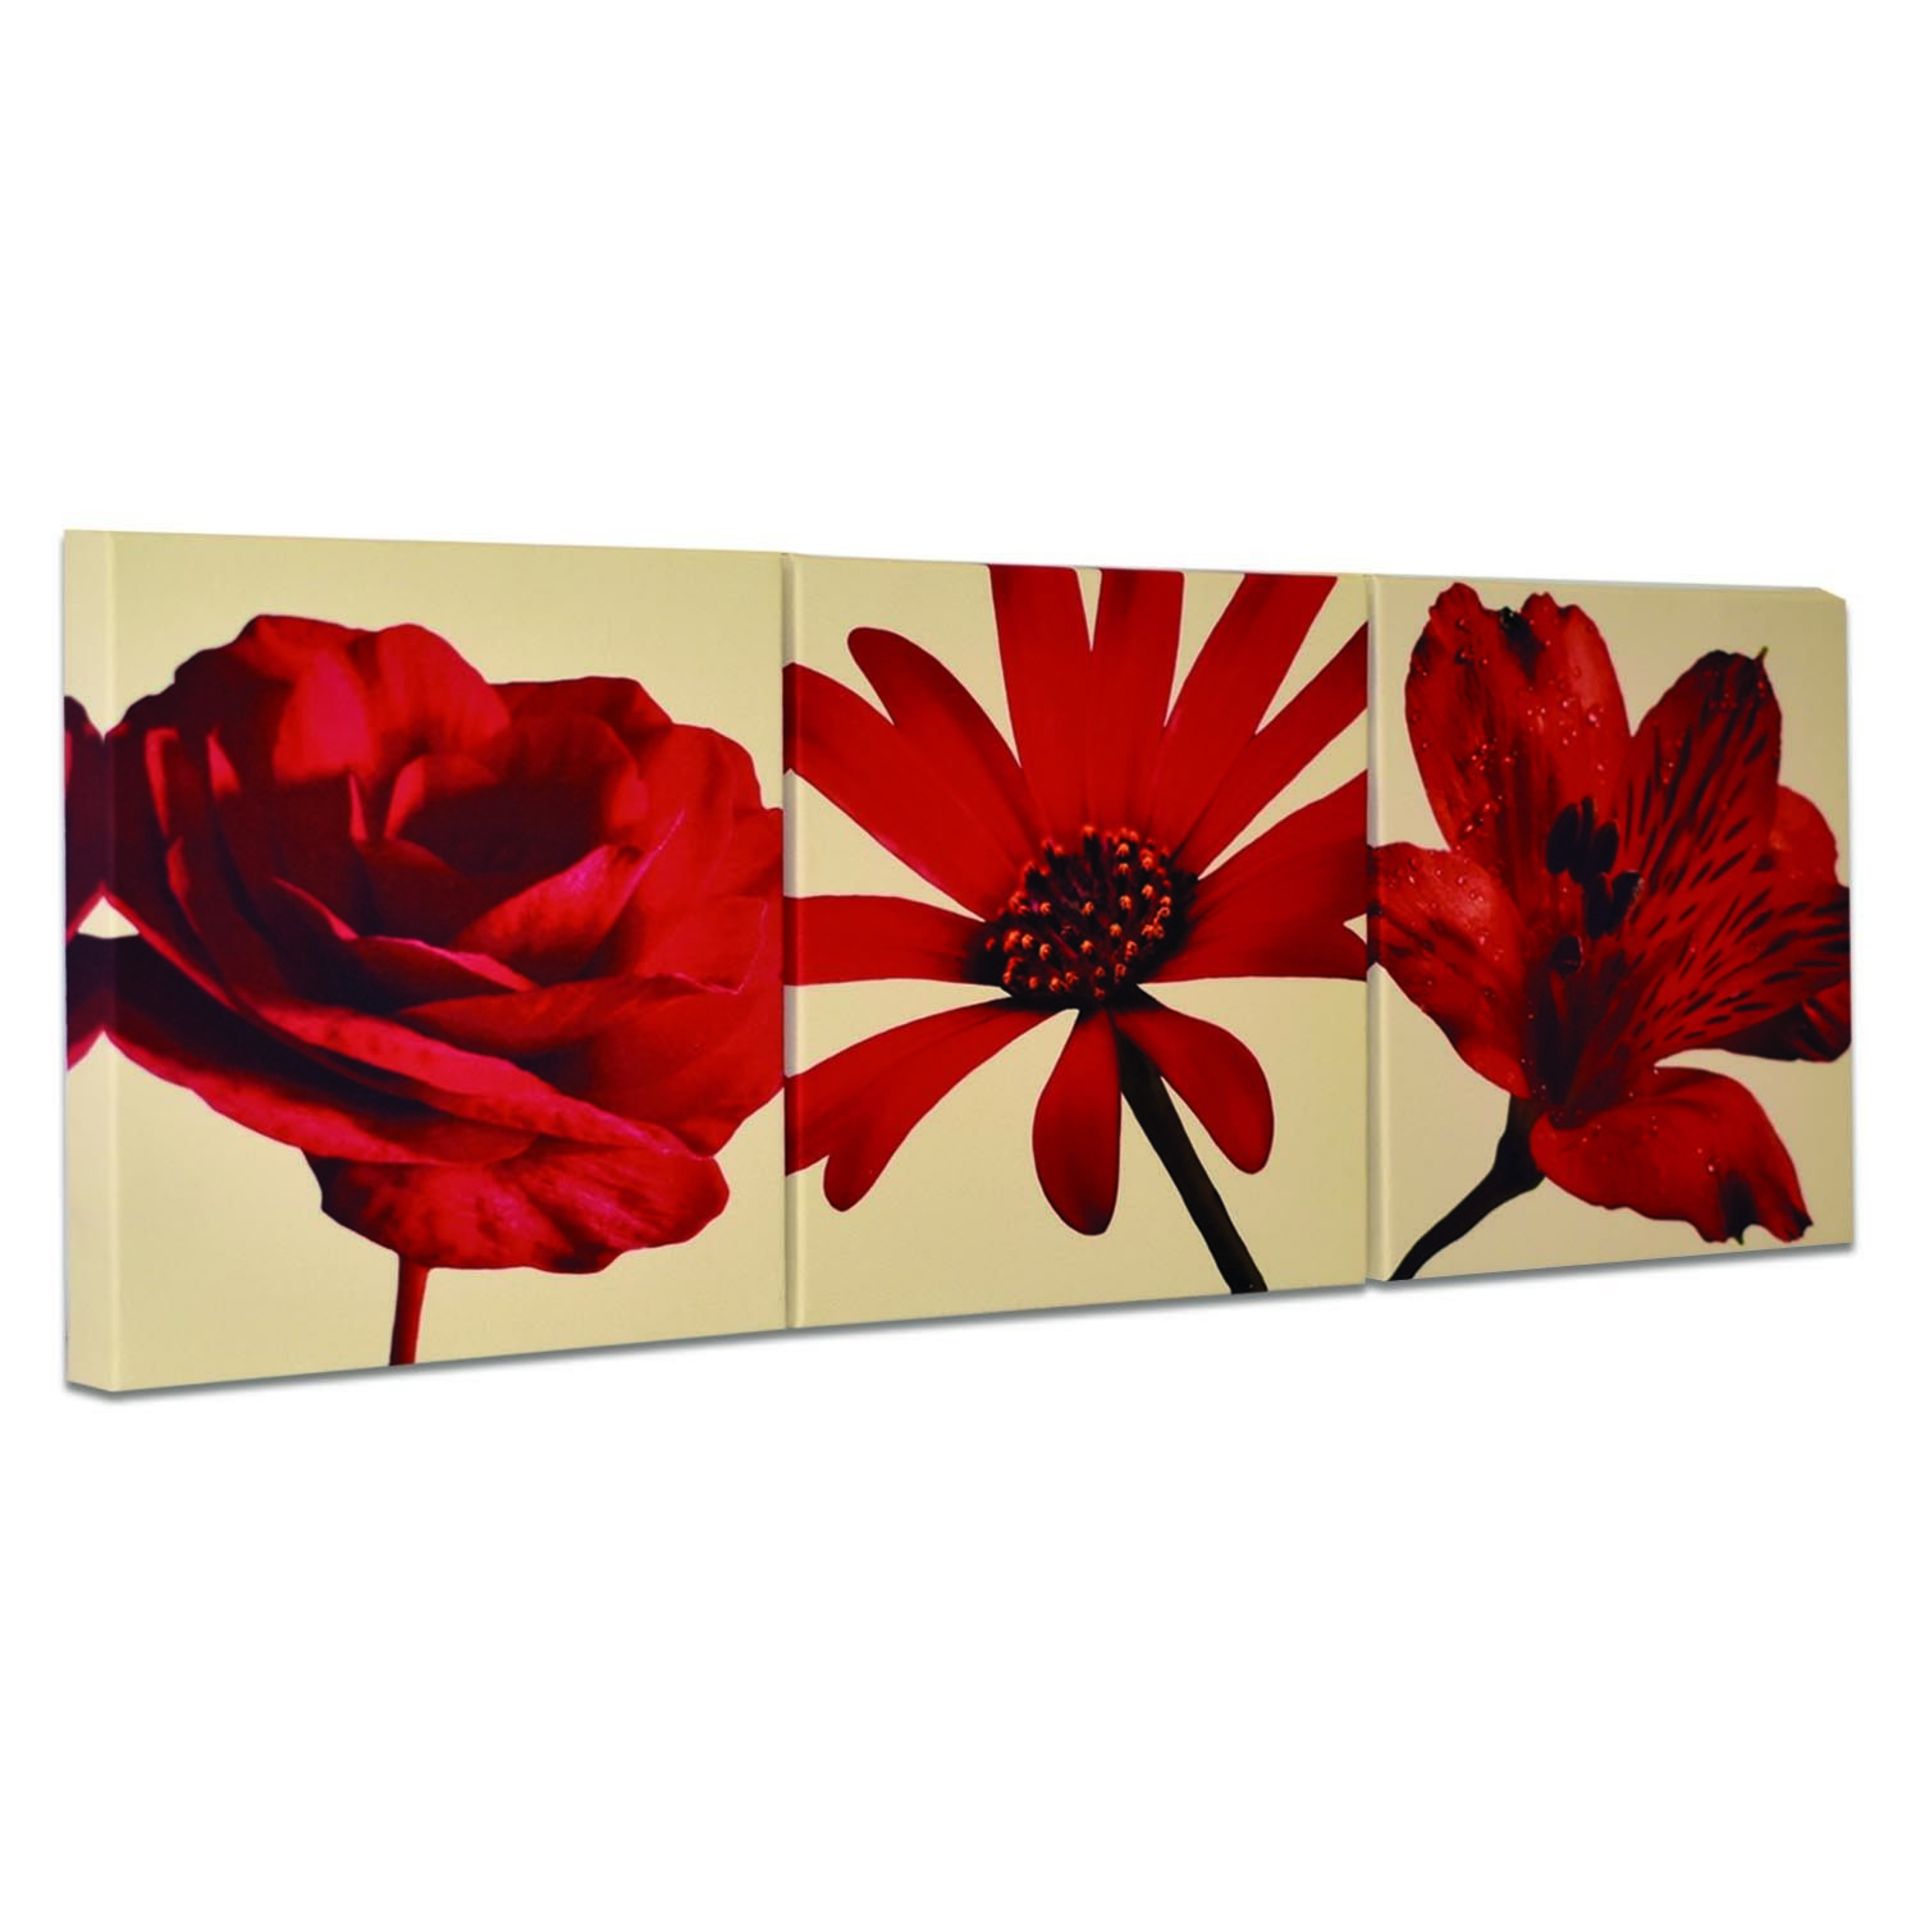 1 BRAND NEW BOXED ARTHOUSE RED ON CREAM FLOWERS SET OF 3 CANVAS 60CMX20CM